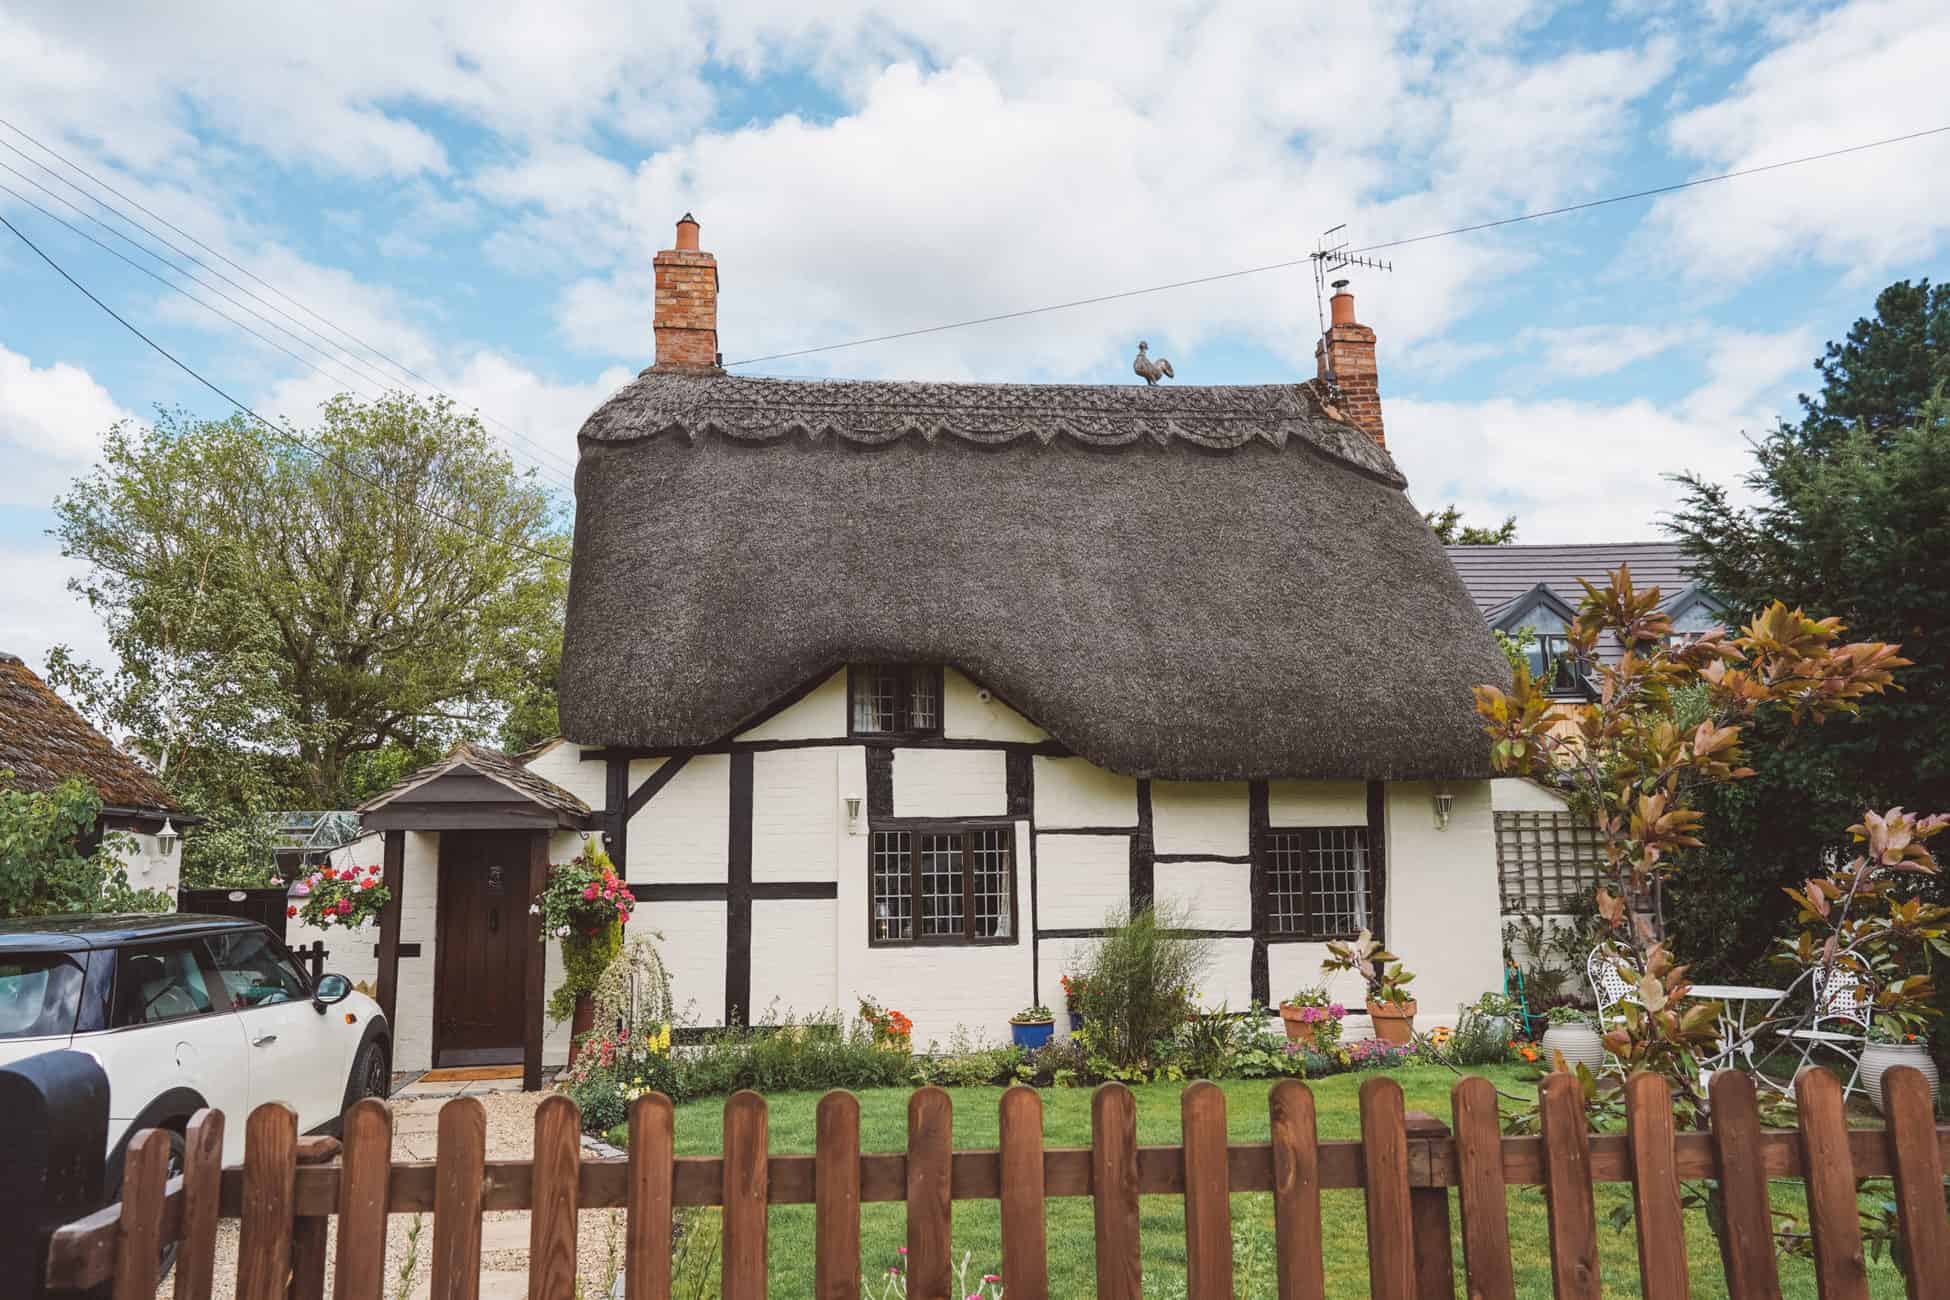 Welford-on-Avon the prettiest thatched village in England